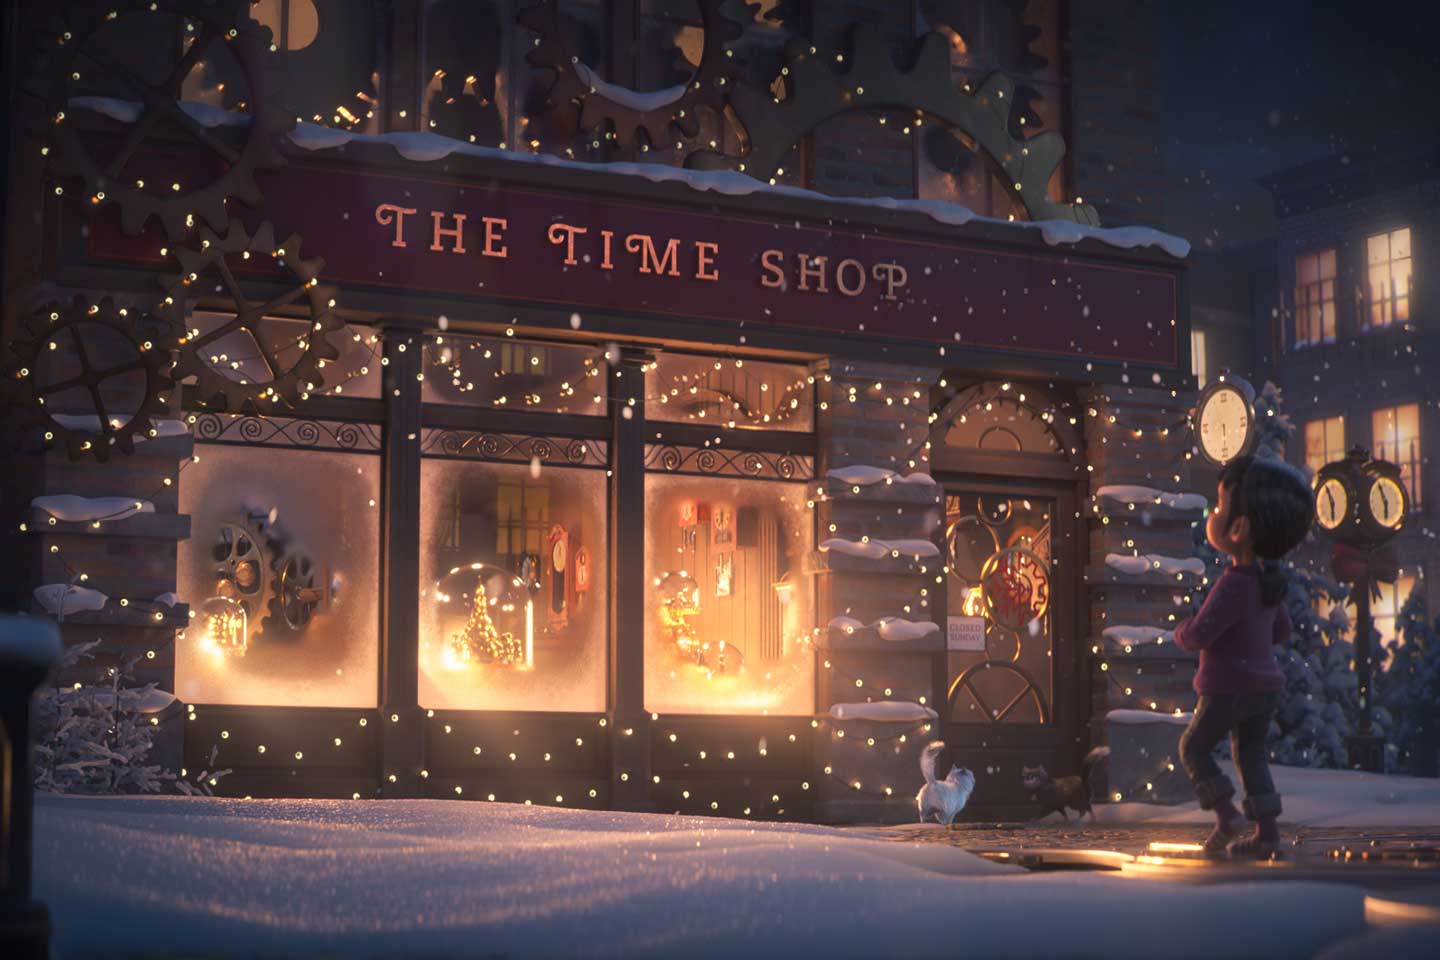 Animated film the Time Shop, outside view